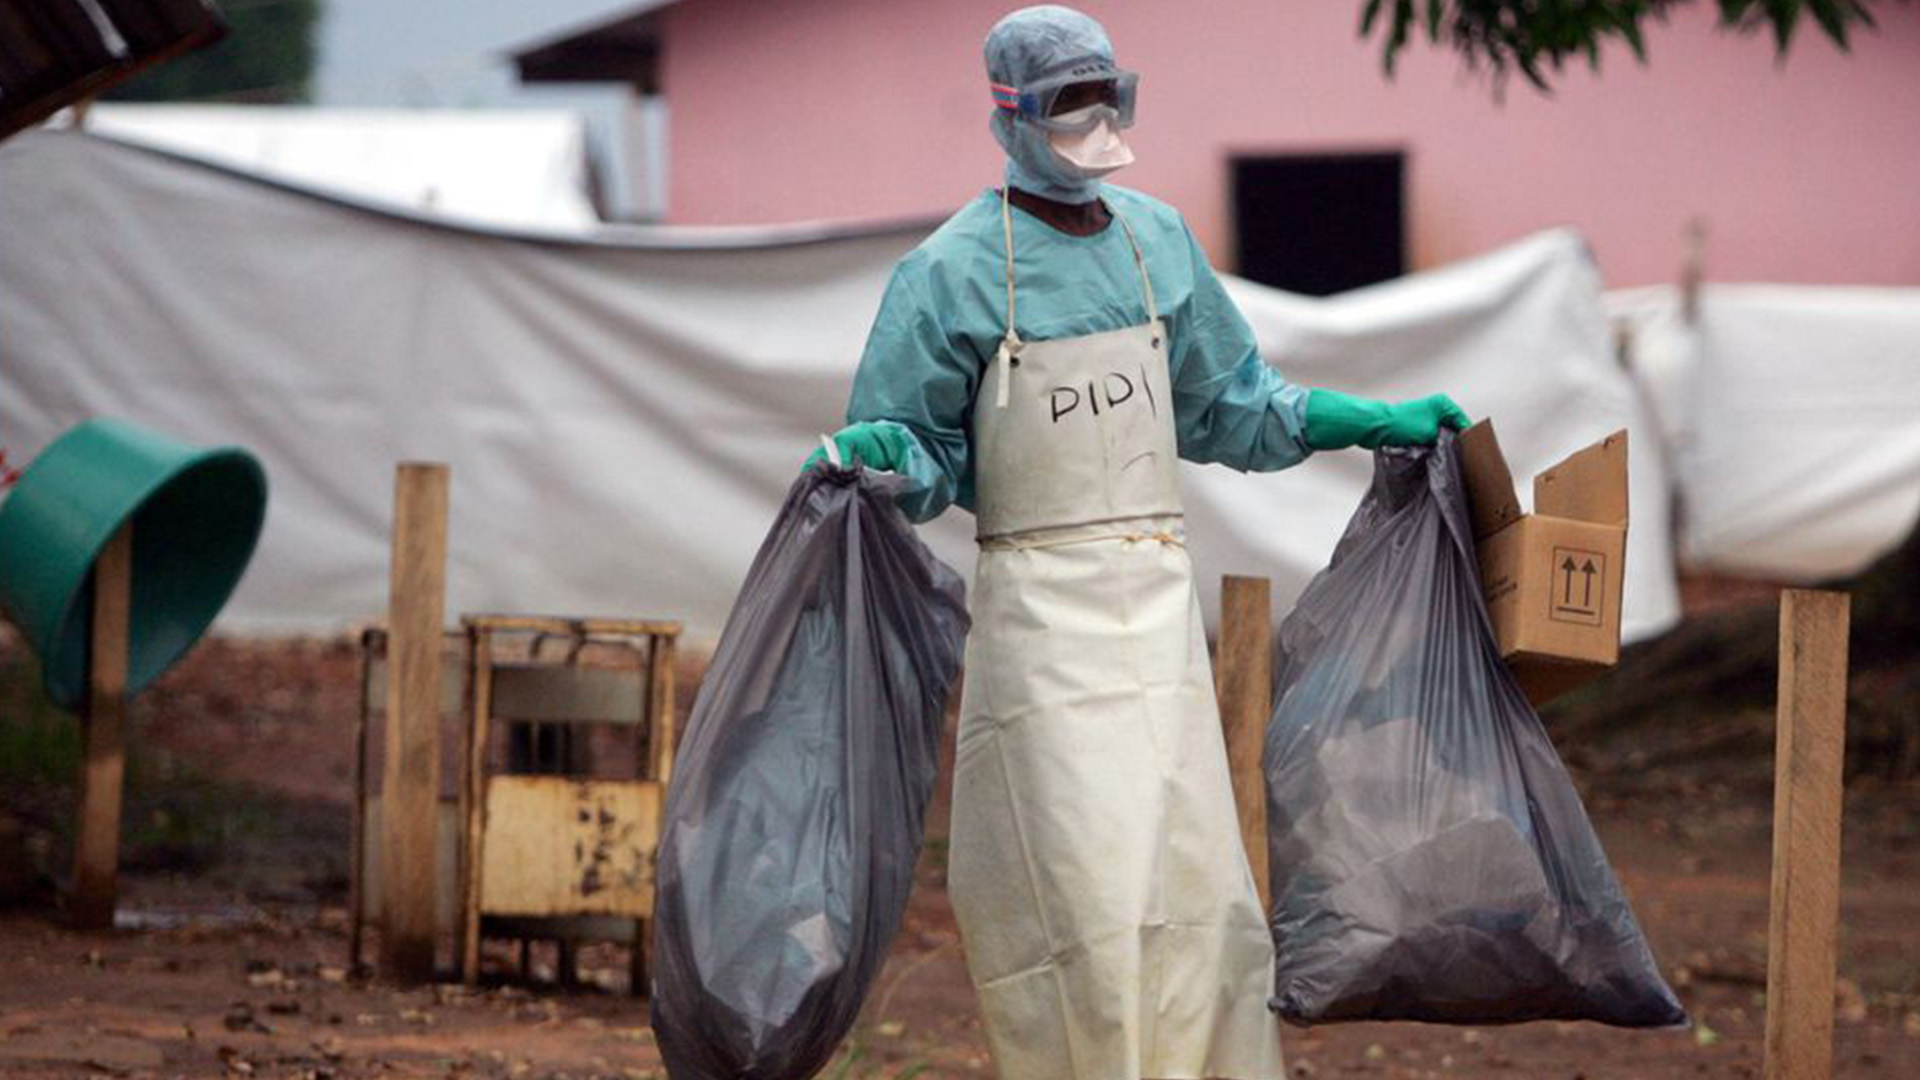  A health worker in protective clothing carries waste for disposal outside the isolation ward where victims of the deadly Marburg virus are treated in the northern Angolan town of Uige, File. - Photo Credit: Reuters